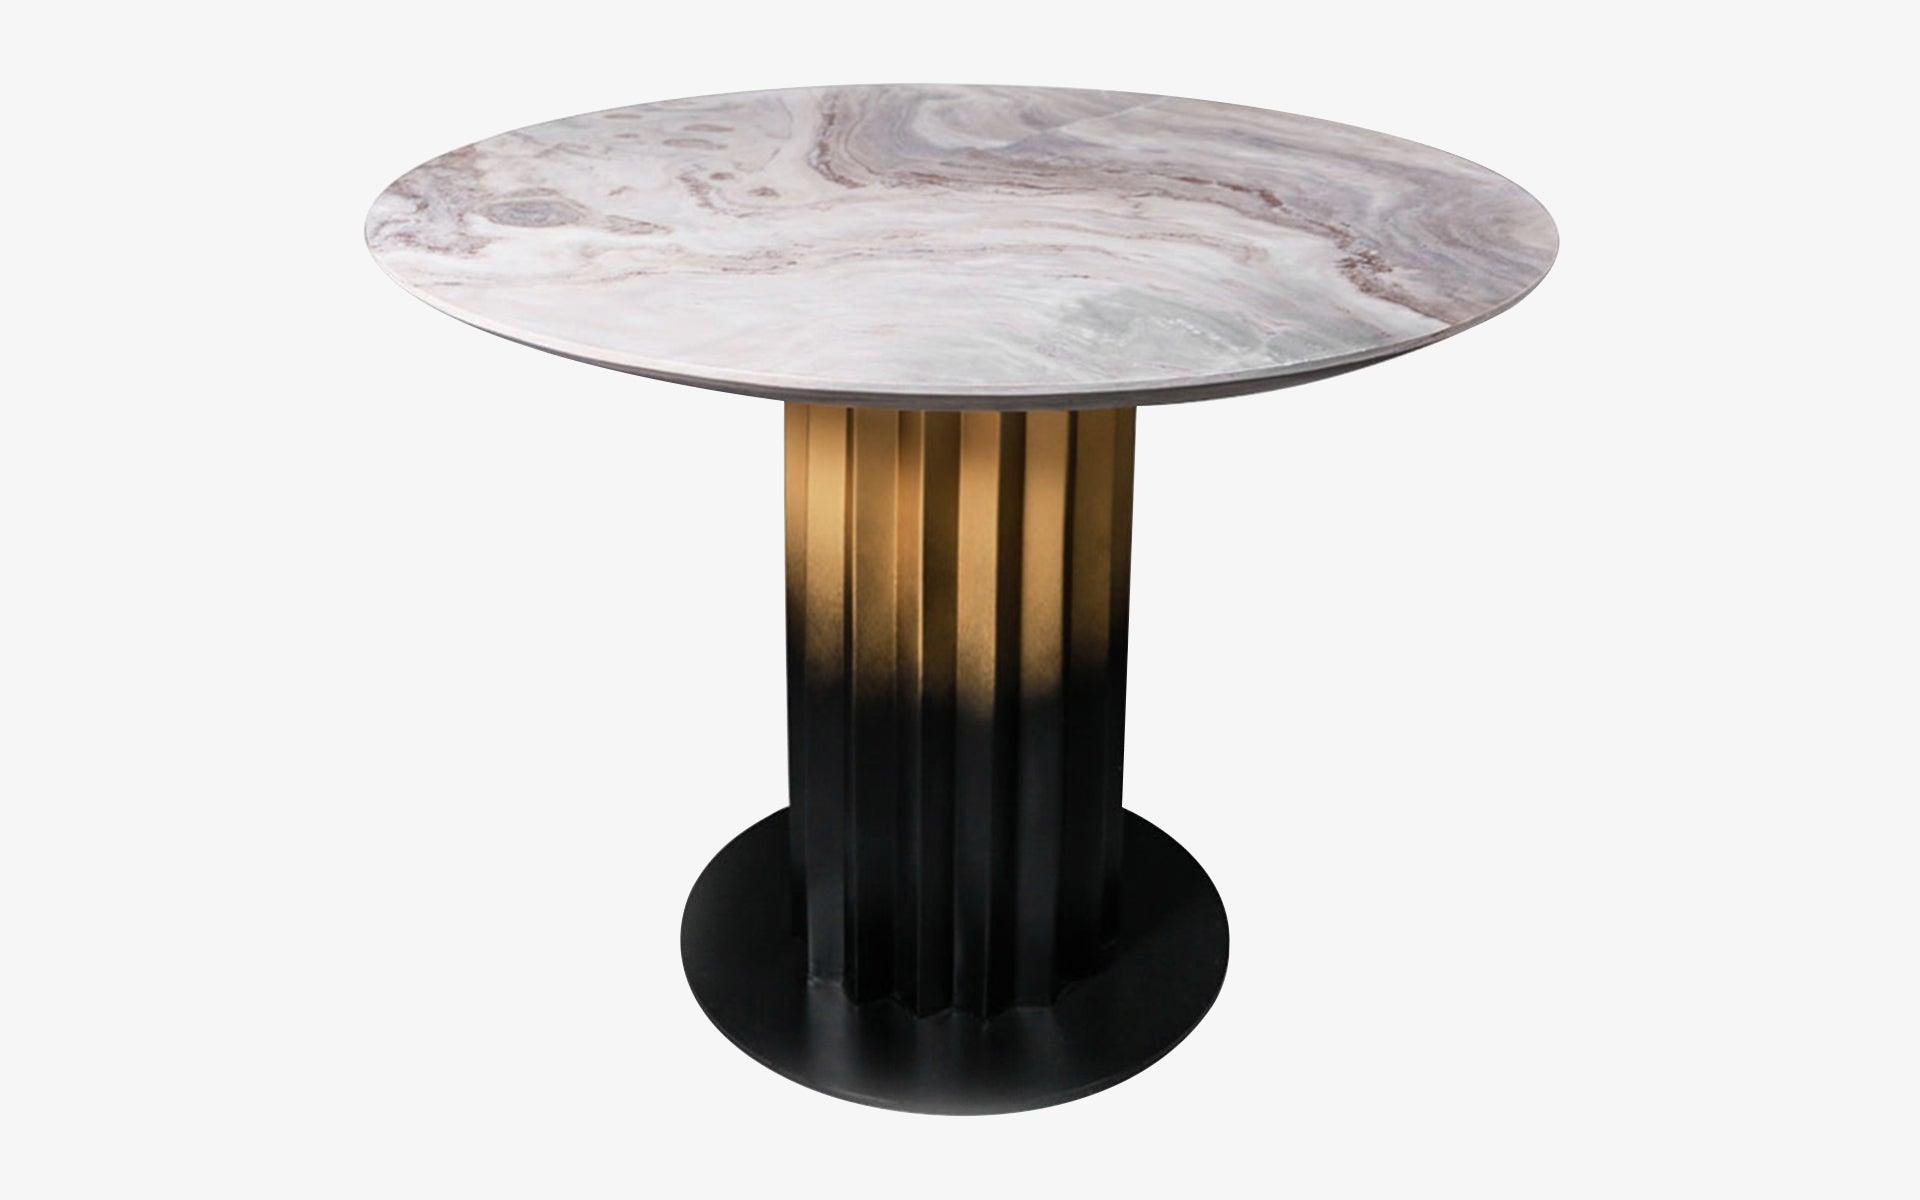 Recalled Round Table Calacatta Bluette (Brass With Gradient Transition) - laguglobal